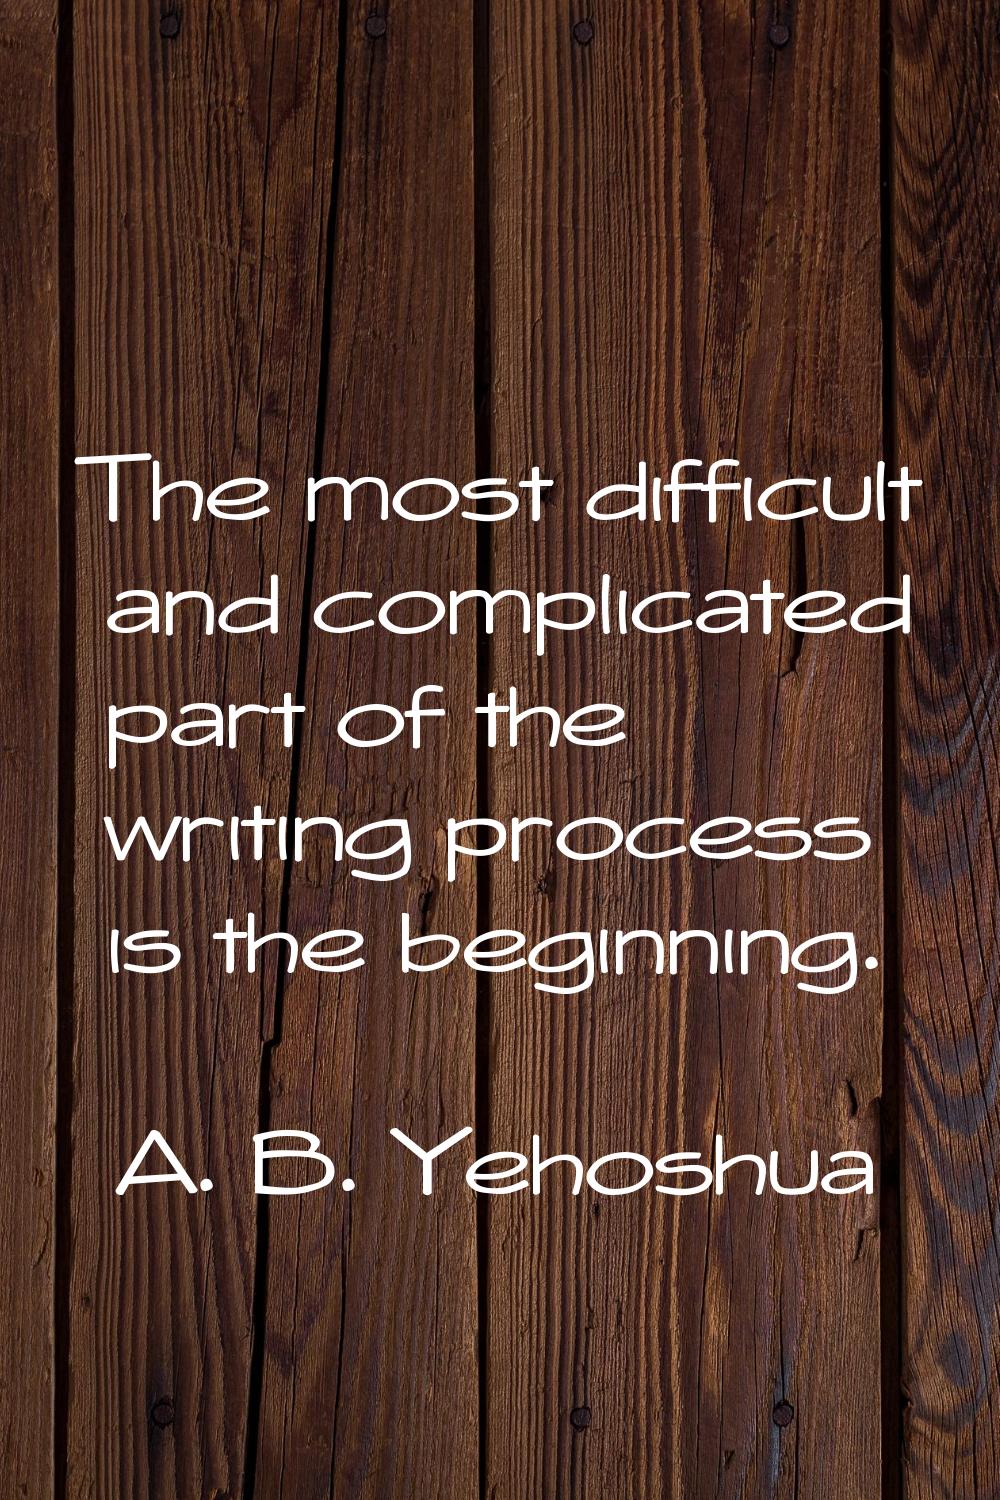 The most difficult and complicated part of the writing process is the beginning.